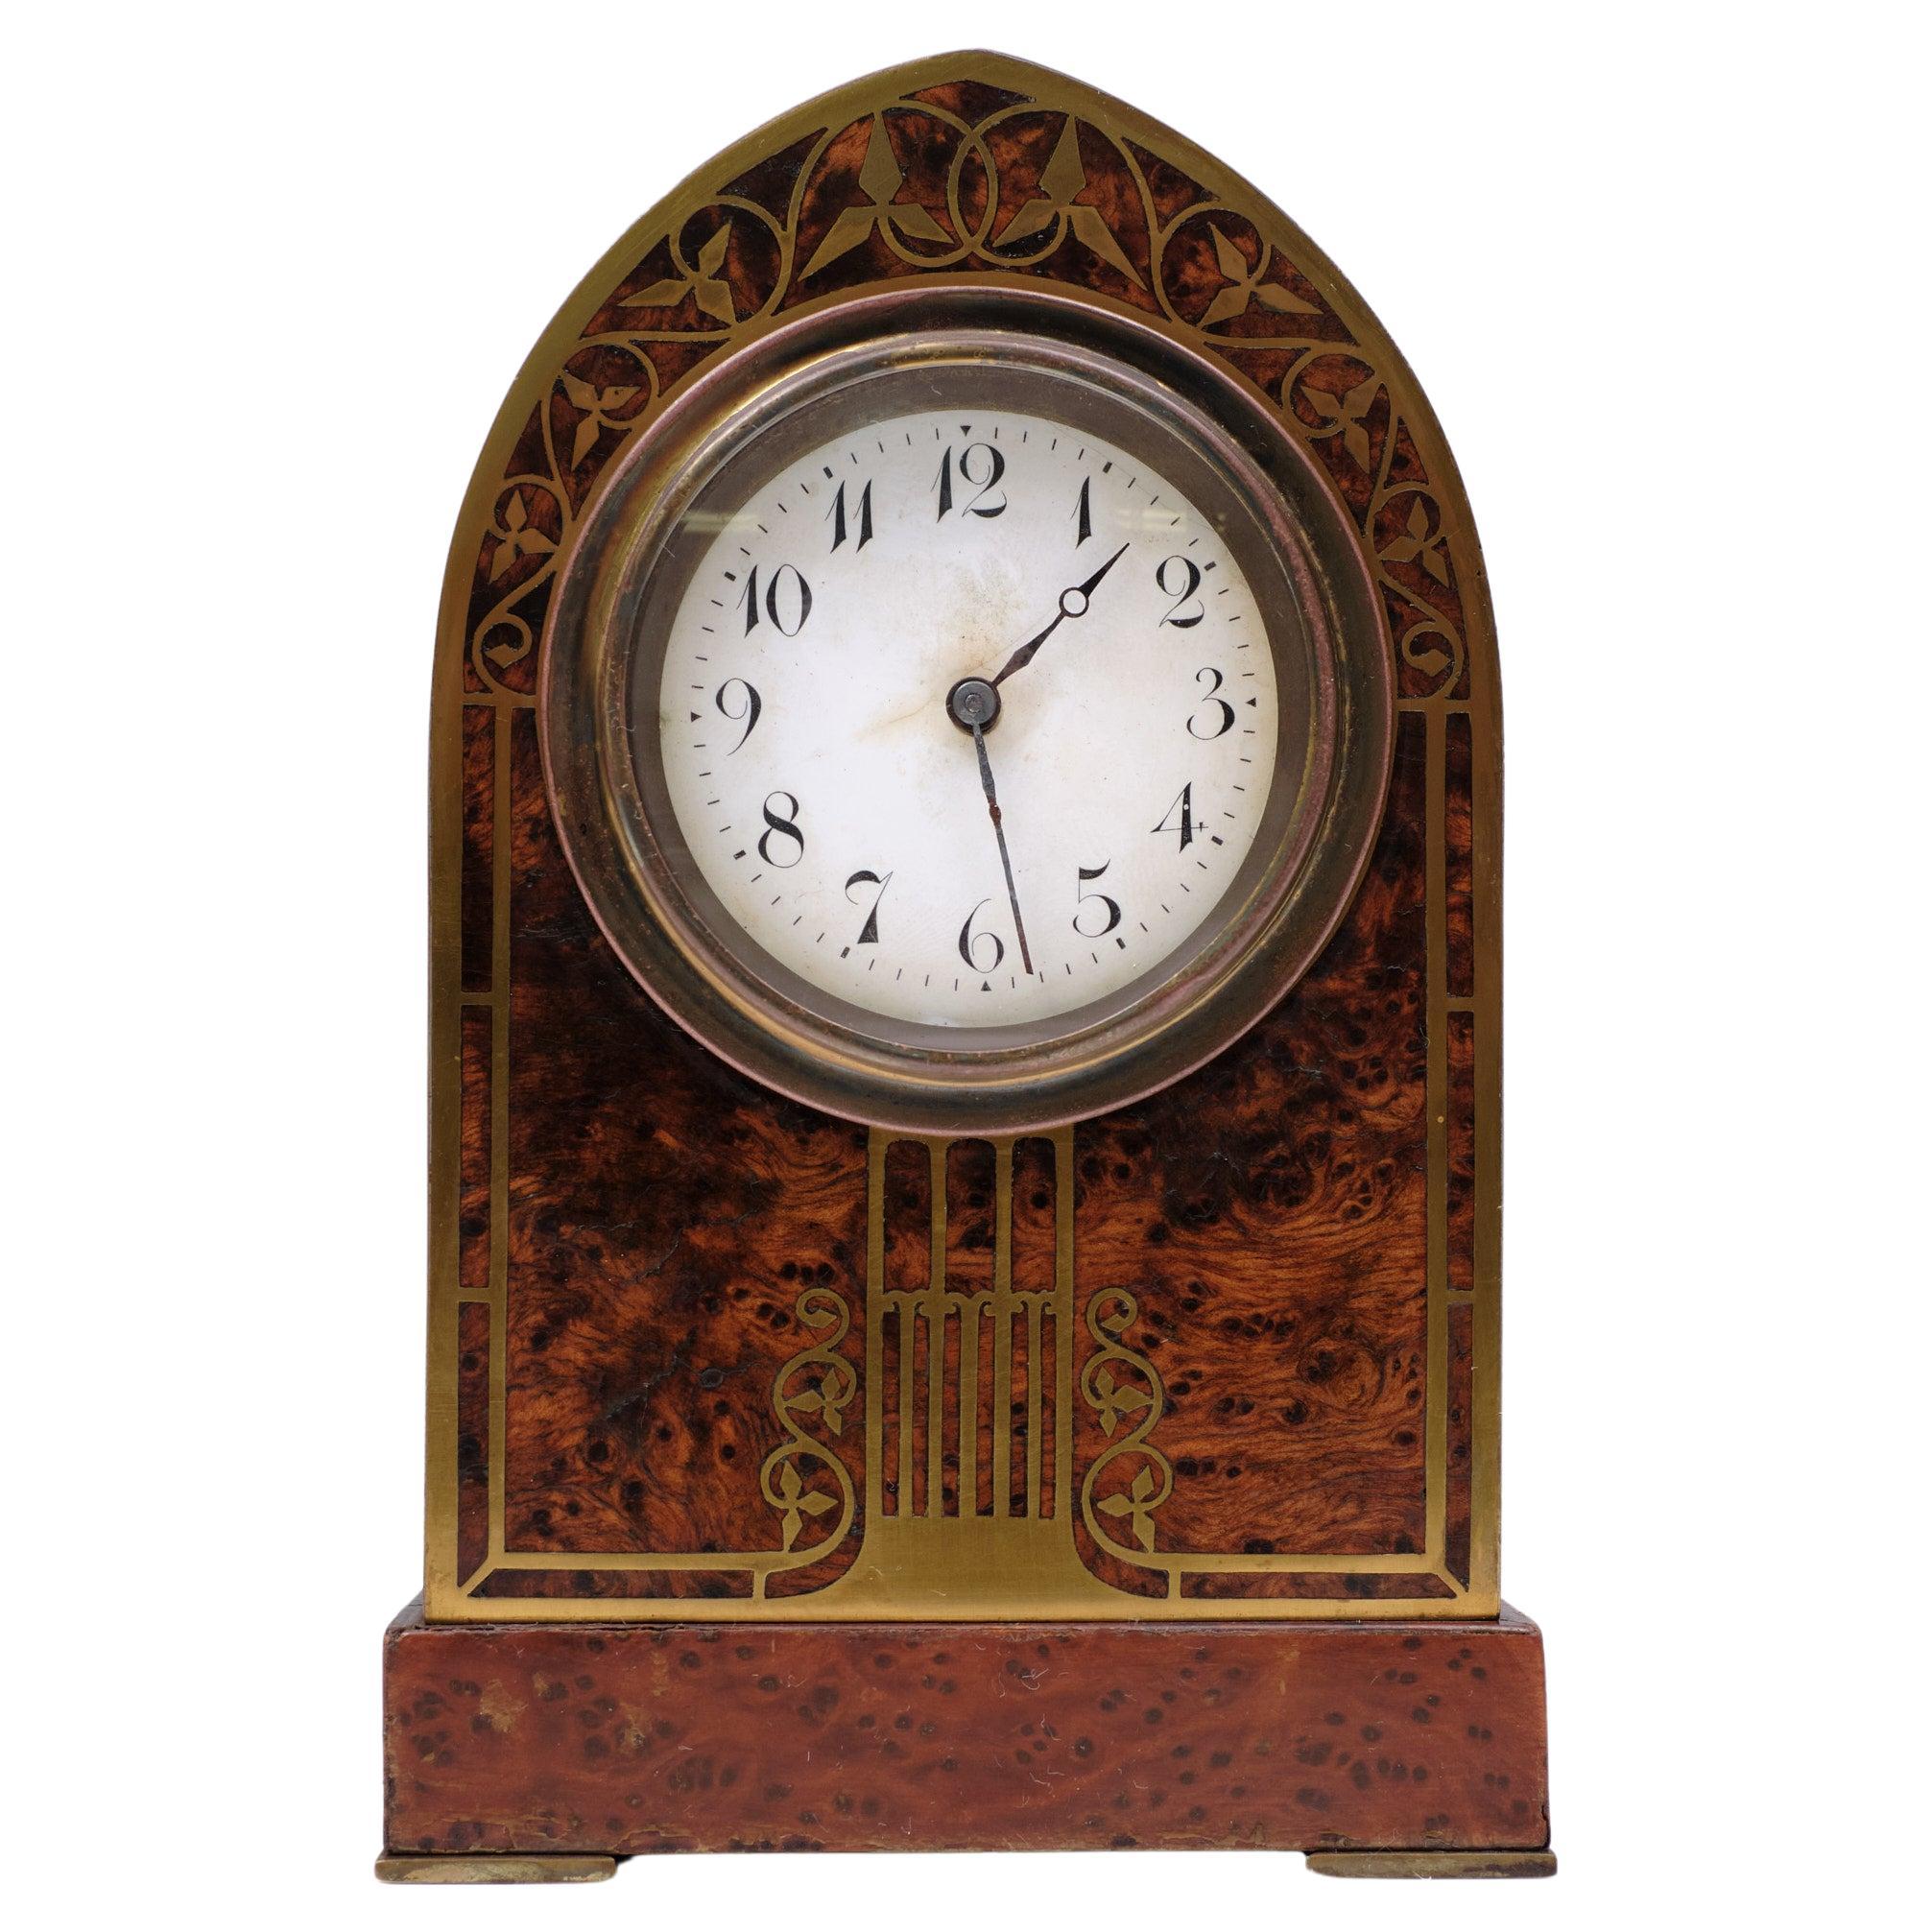 Beautiful  Art Nouveau Desk Clock .Manufactured by  Erhard & Söhne
in Austria 1910 Burl wood with  Brass inlay . Superb craftsman work .
The movement was worn out . So i sent it to a very good watchmaker in Belgian.
An now its bin complete restored